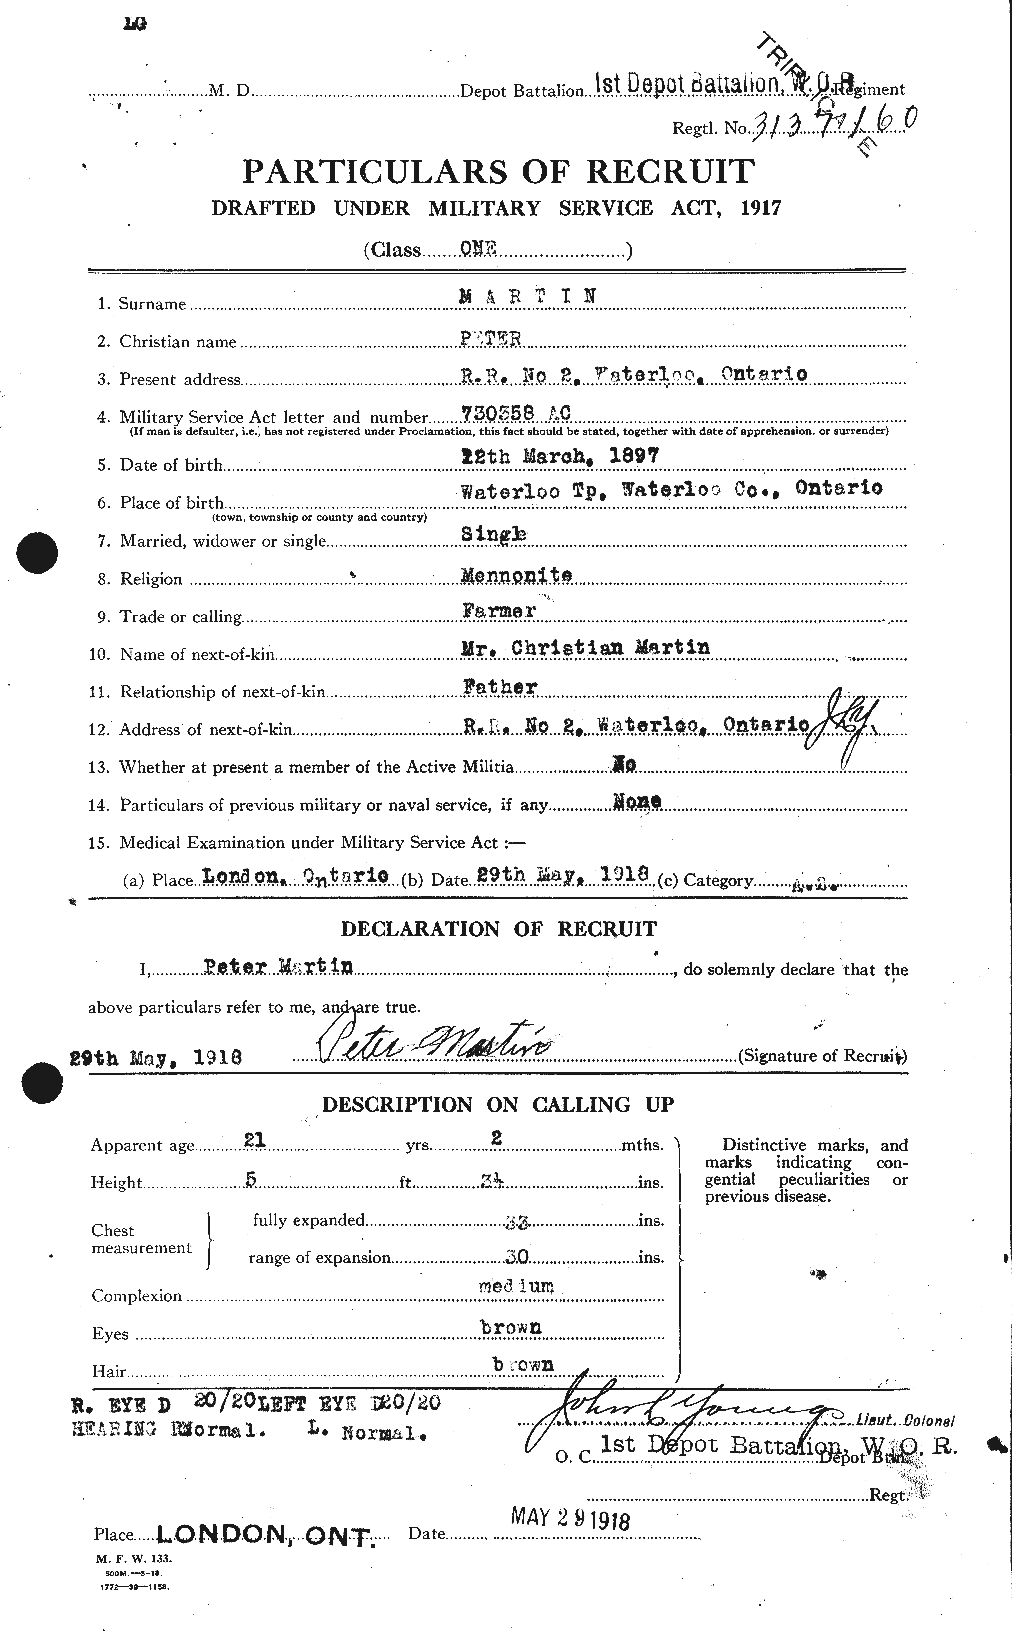 Personnel Records of the First World War - CEF 483113a